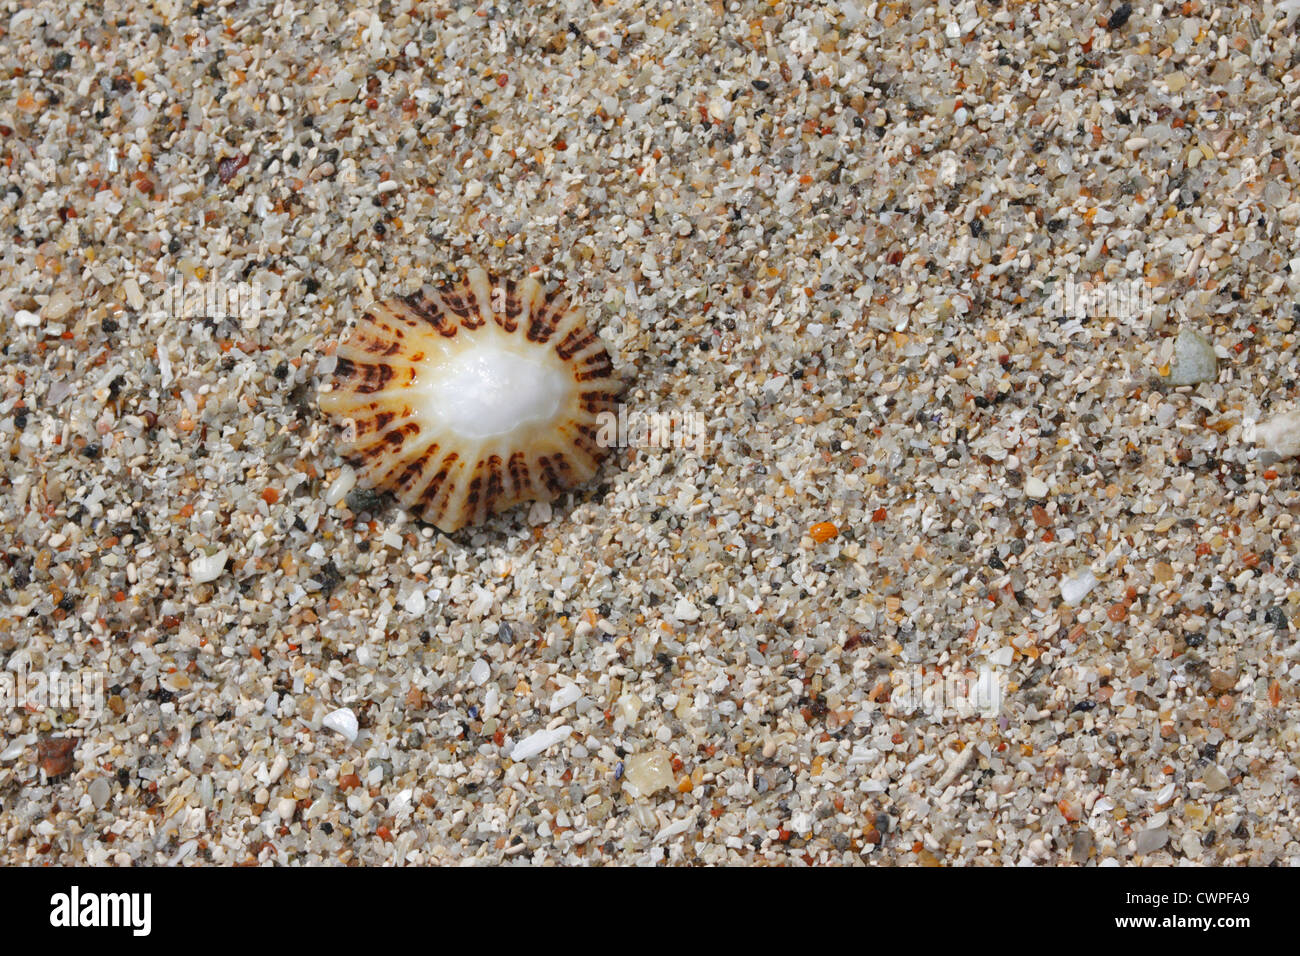 Abstract of a limpet on a beach in Ardnamurchan, Scotland, UK Stock Photo